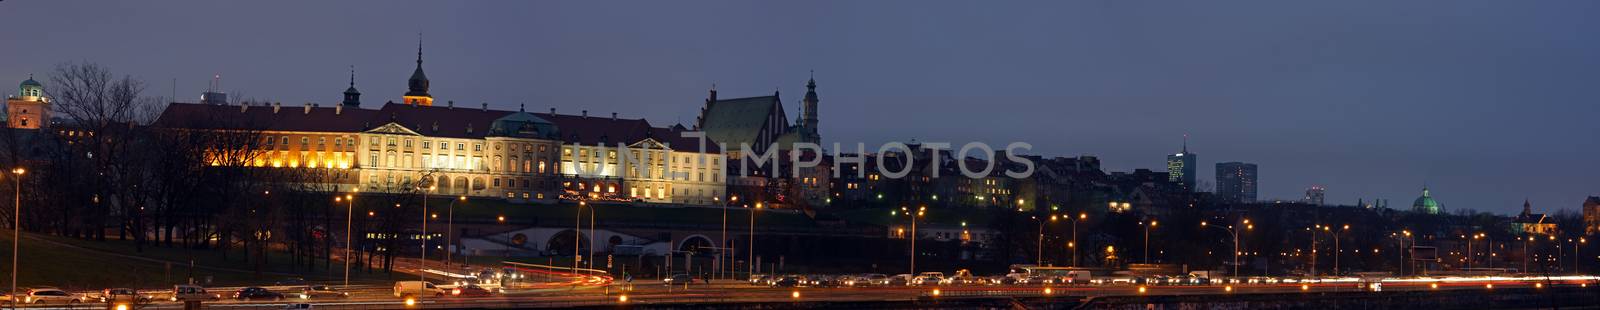 Royal castle, Old town and New town at night